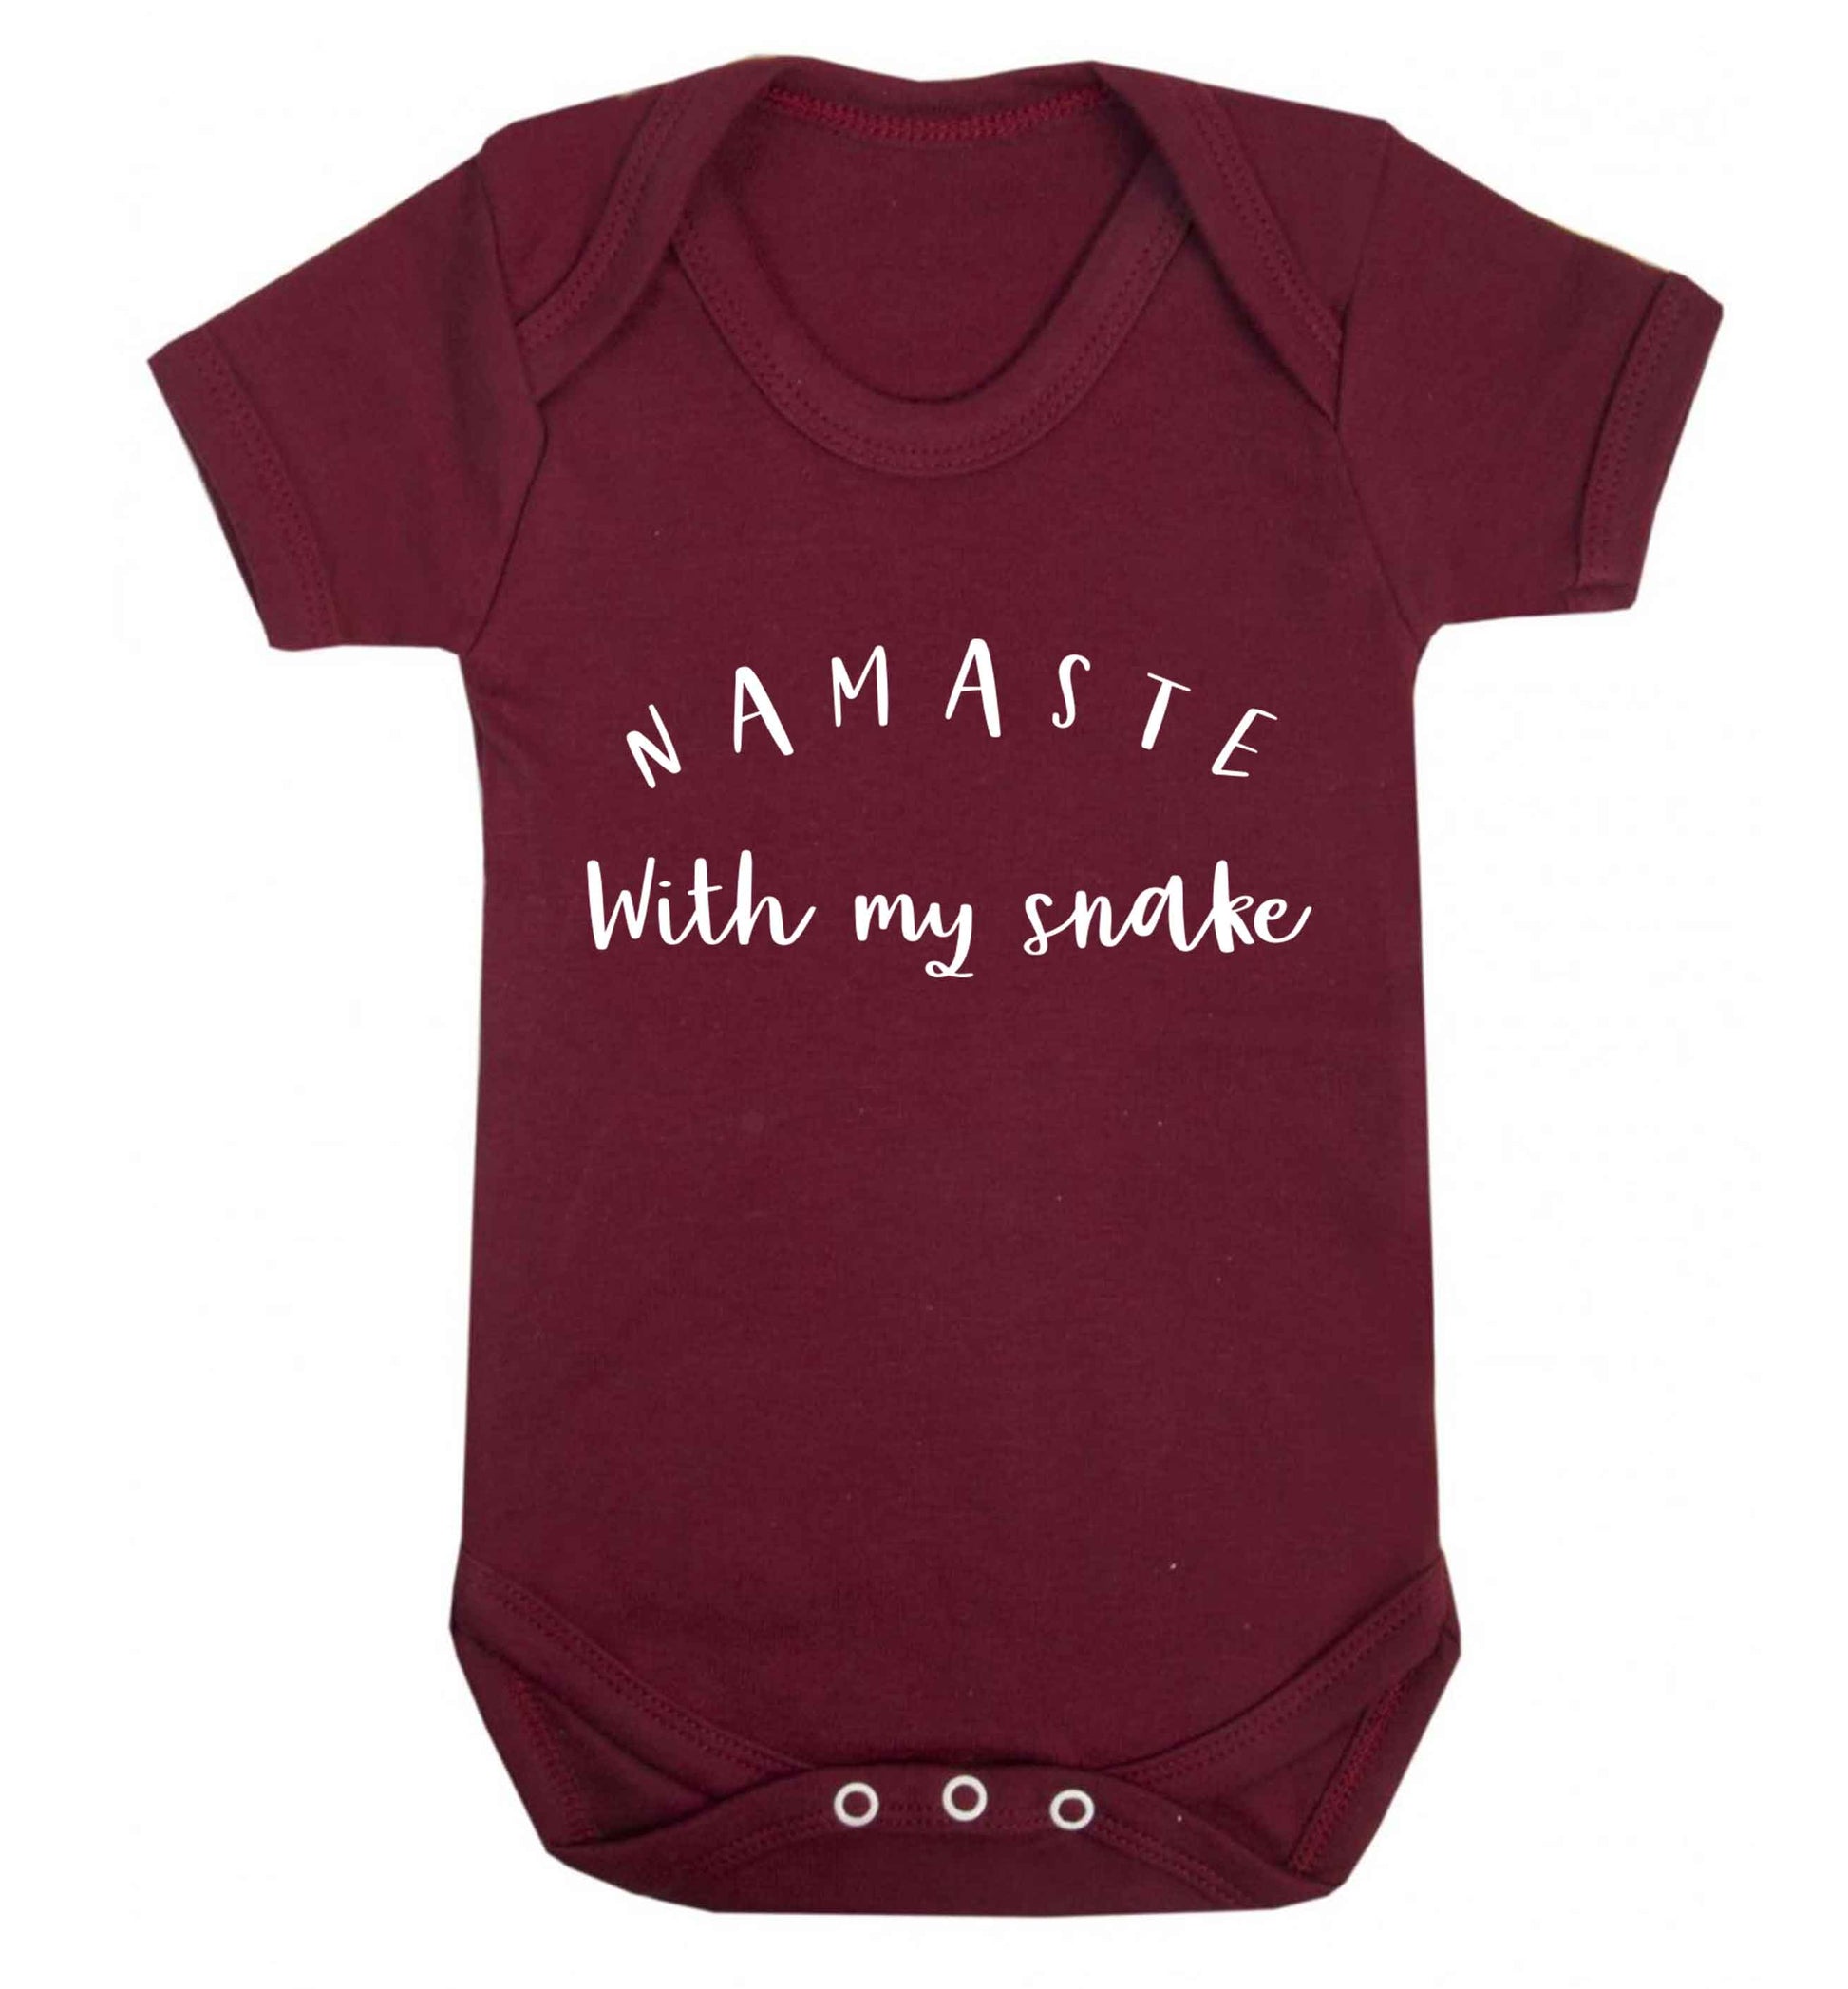 Namaste with my snake Baby Vest maroon 18-24 months